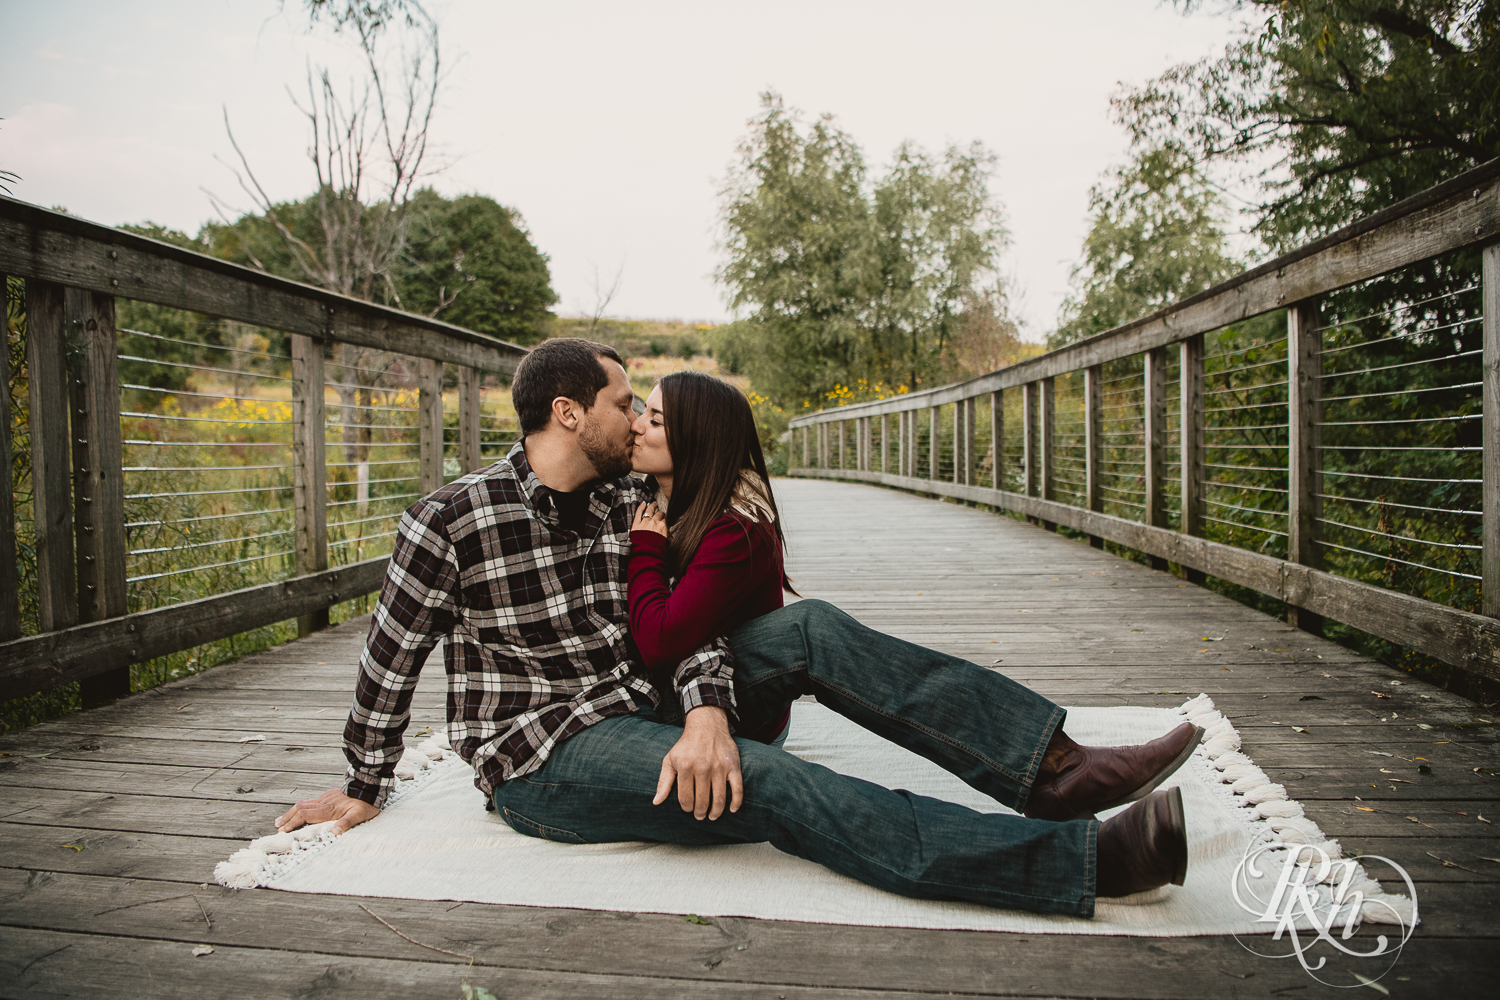 Man in flannel and woman in red shirt kiss on bridge during sunset at Lebanon Hills Regional Park in Eagan, Minnesota.